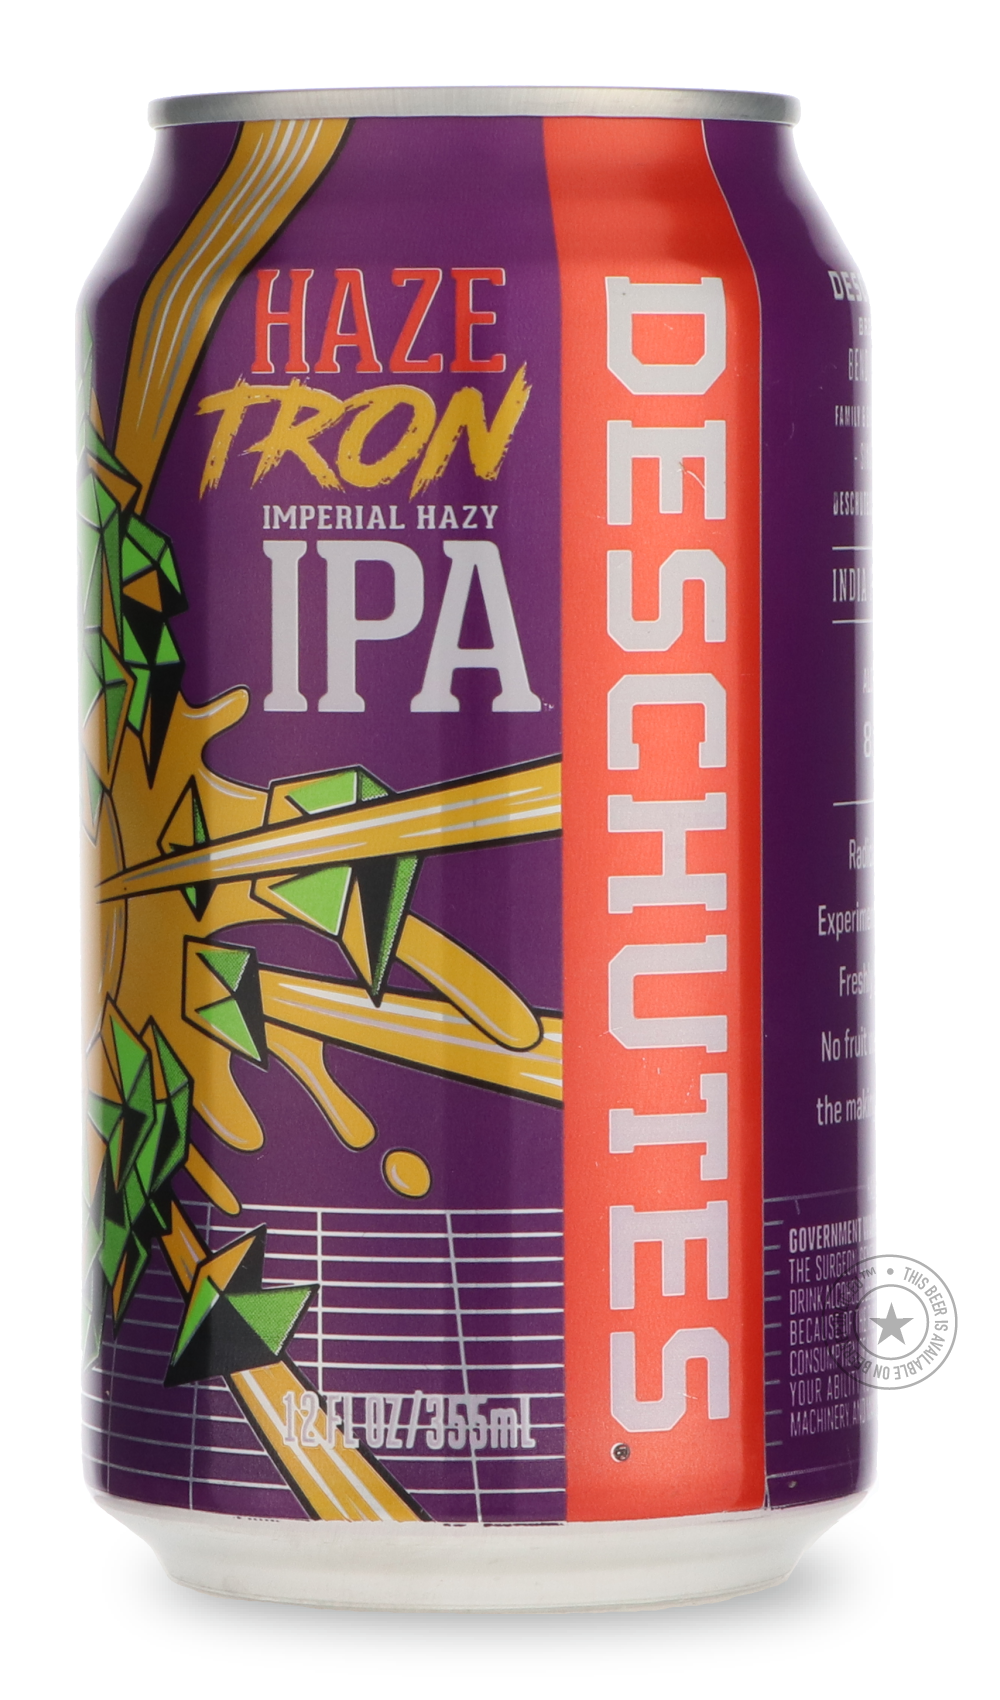 -Deschutes- Haze Tron Imperial Hazy IPA-IPA- Only @ Beer Republic - The best online beer store for American & Canadian craft beer - Buy beer online from the USA and Canada - Bier online kopen - Amerikaans bier kopen - Craft beer store - Craft beer kopen - Amerikanisch bier kaufen - Bier online kaufen - Acheter biere online - IPA - Stout - Porter - New England IPA - Hazy IPA - Imperial Stout - Barrel Aged - Barrel Aged Imperial Stout - Brown - Dark beer - Blond - Blonde - Pilsner - Lager - Wheat - Weizen - A